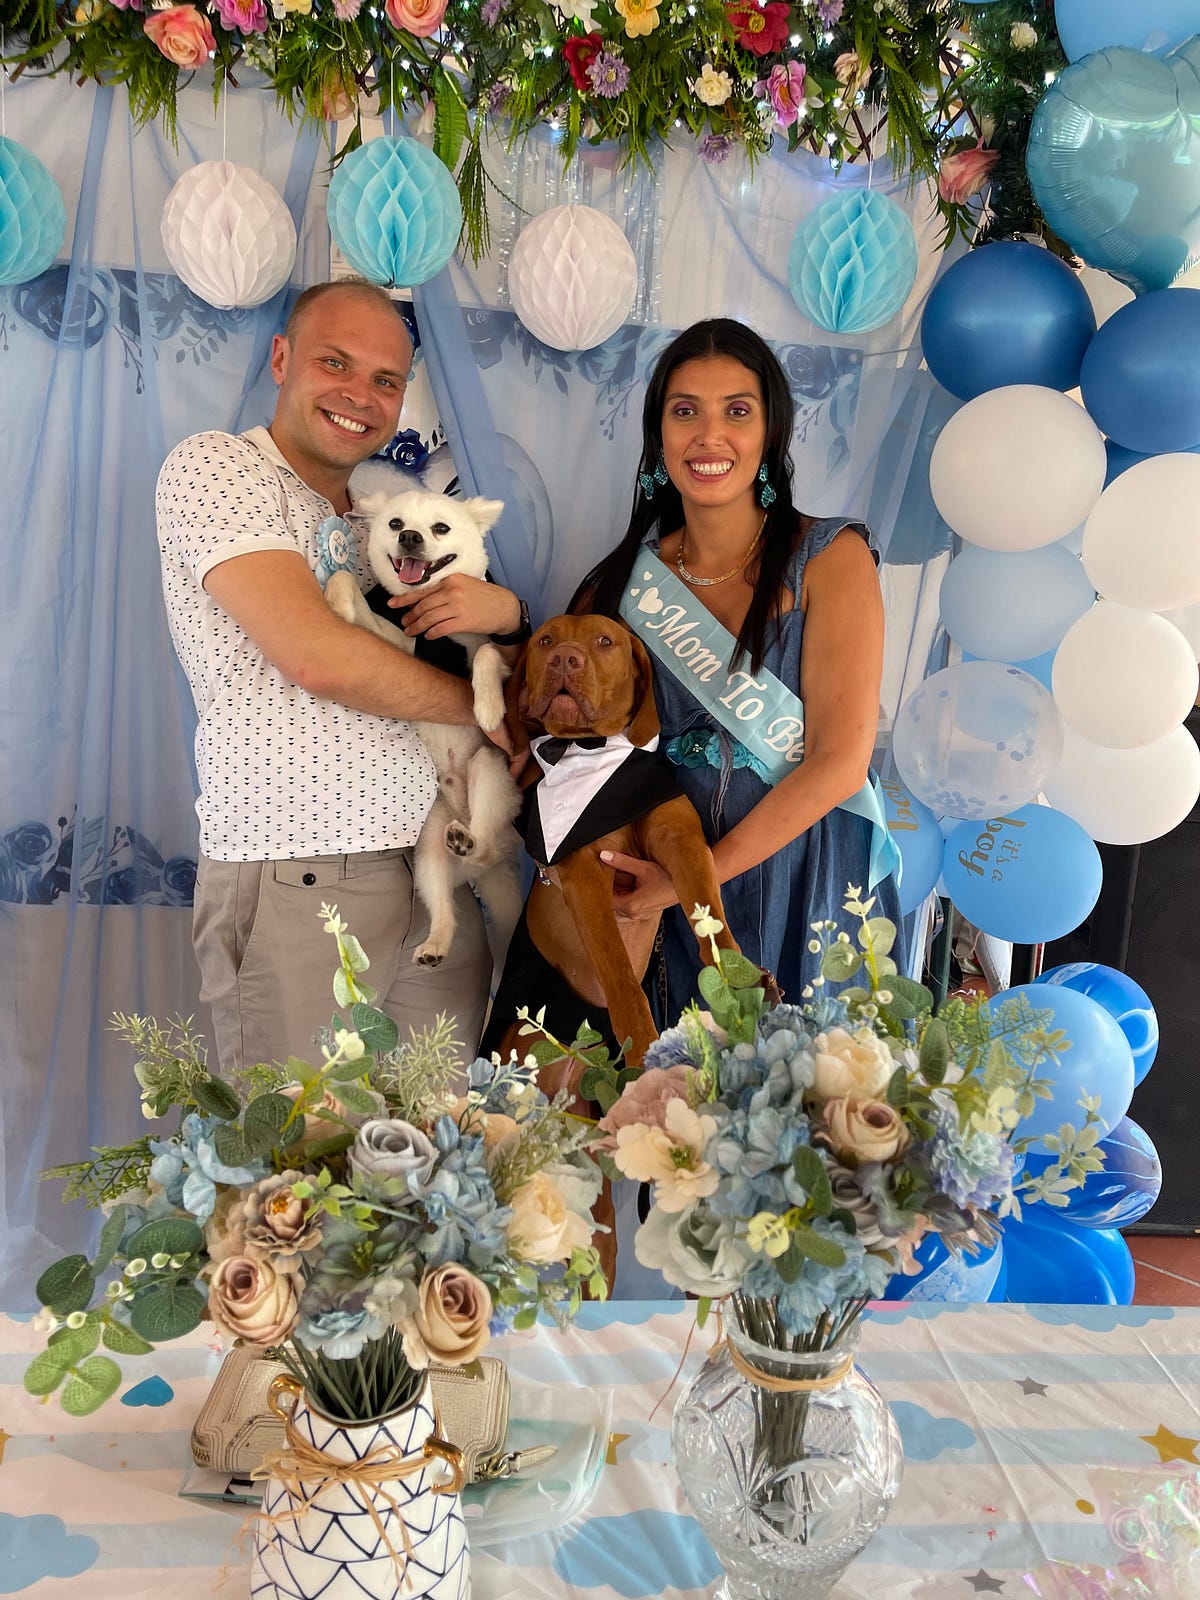 Hottest Cost-Free Baby Shower Decorations for boys Tips  Elephant baby  shower boy, Baby shower decorations for boys, Boy baby shower centerpieces